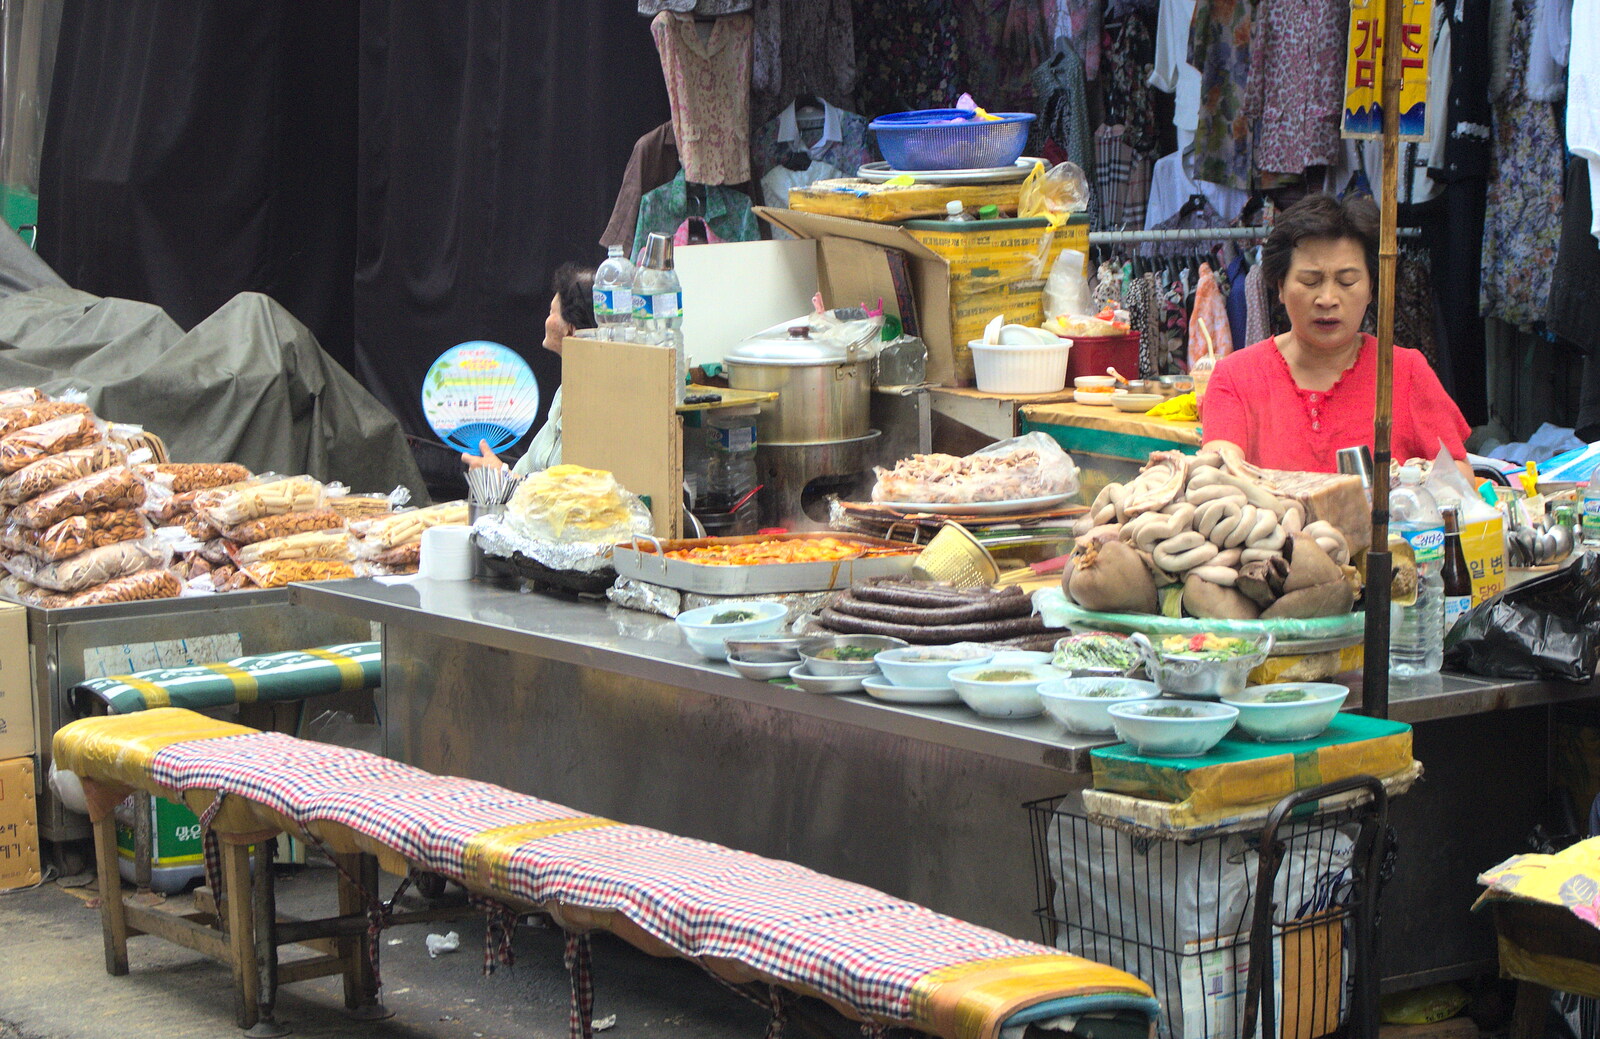 Another food shop waits for customers from Seomun Market, Daegu, South Korea - 1st July 2012